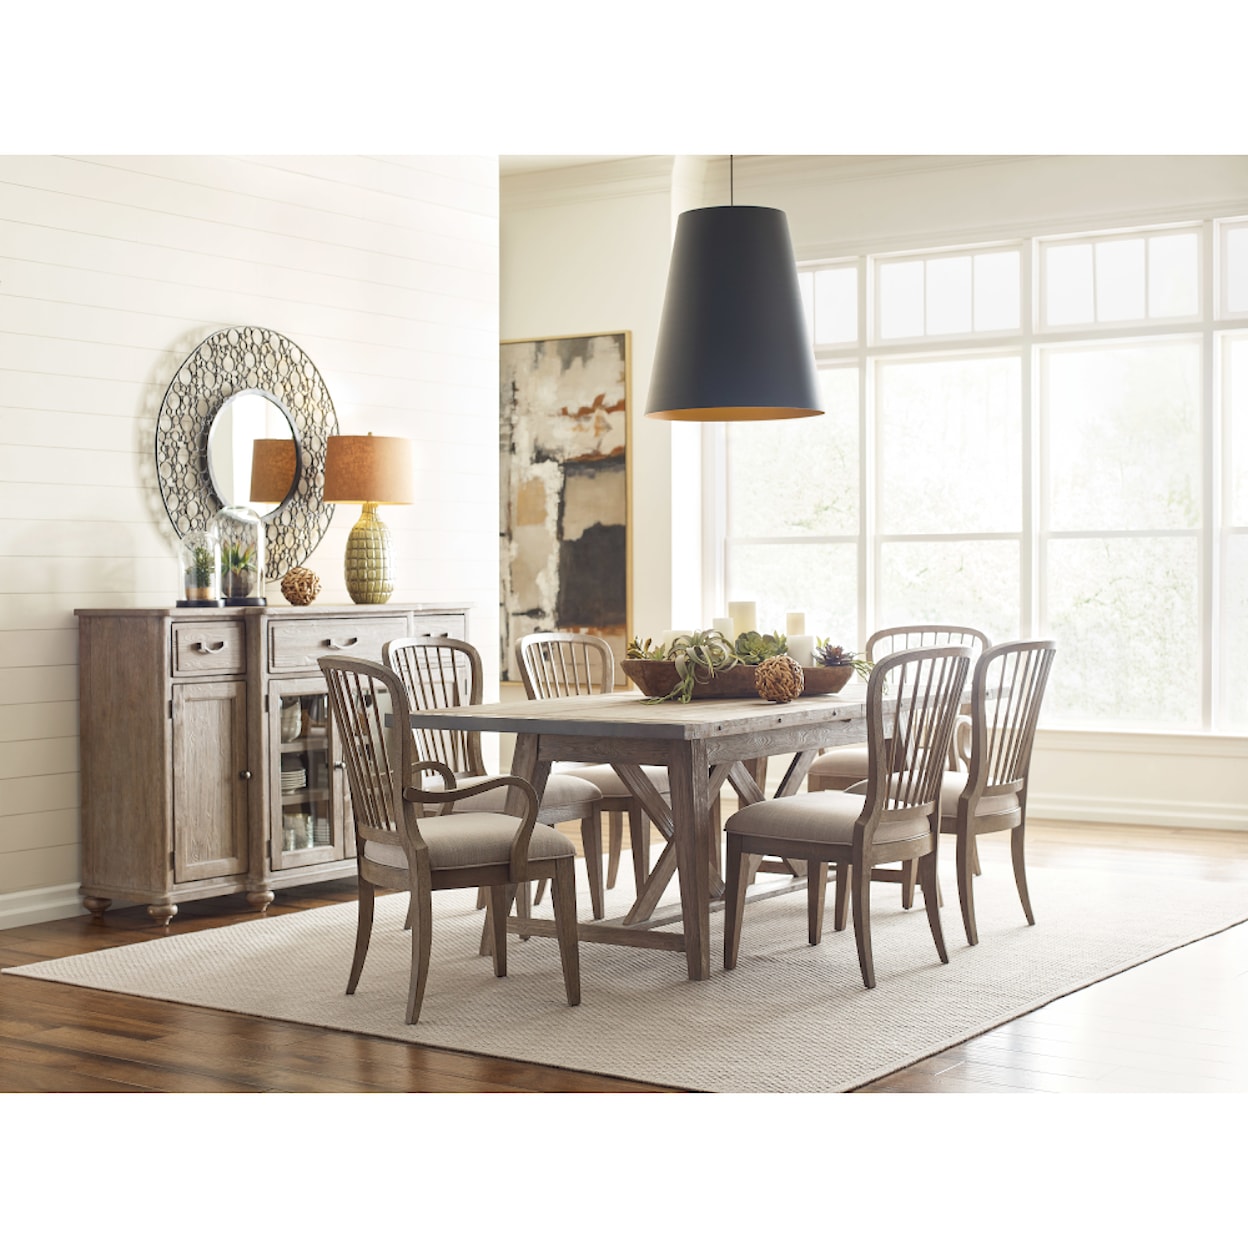 Kincaid Furniture Urban Cottage 7-Piece Dining Set with Buffet